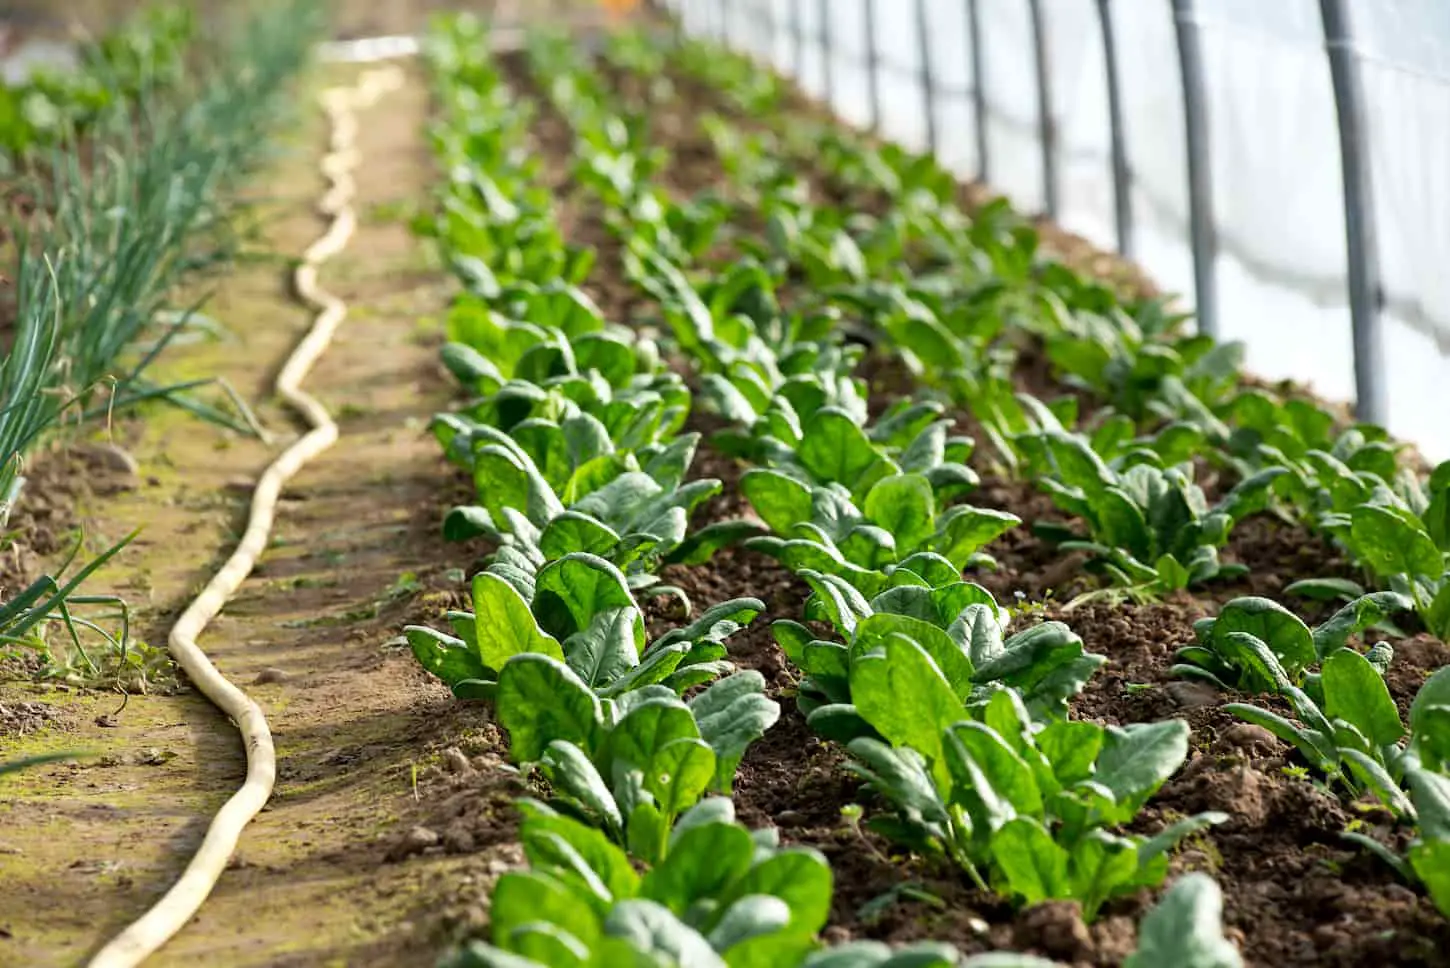 An image of rows of little spinach growing in a greenhouse. Single irrigation hose and green onions beside them.